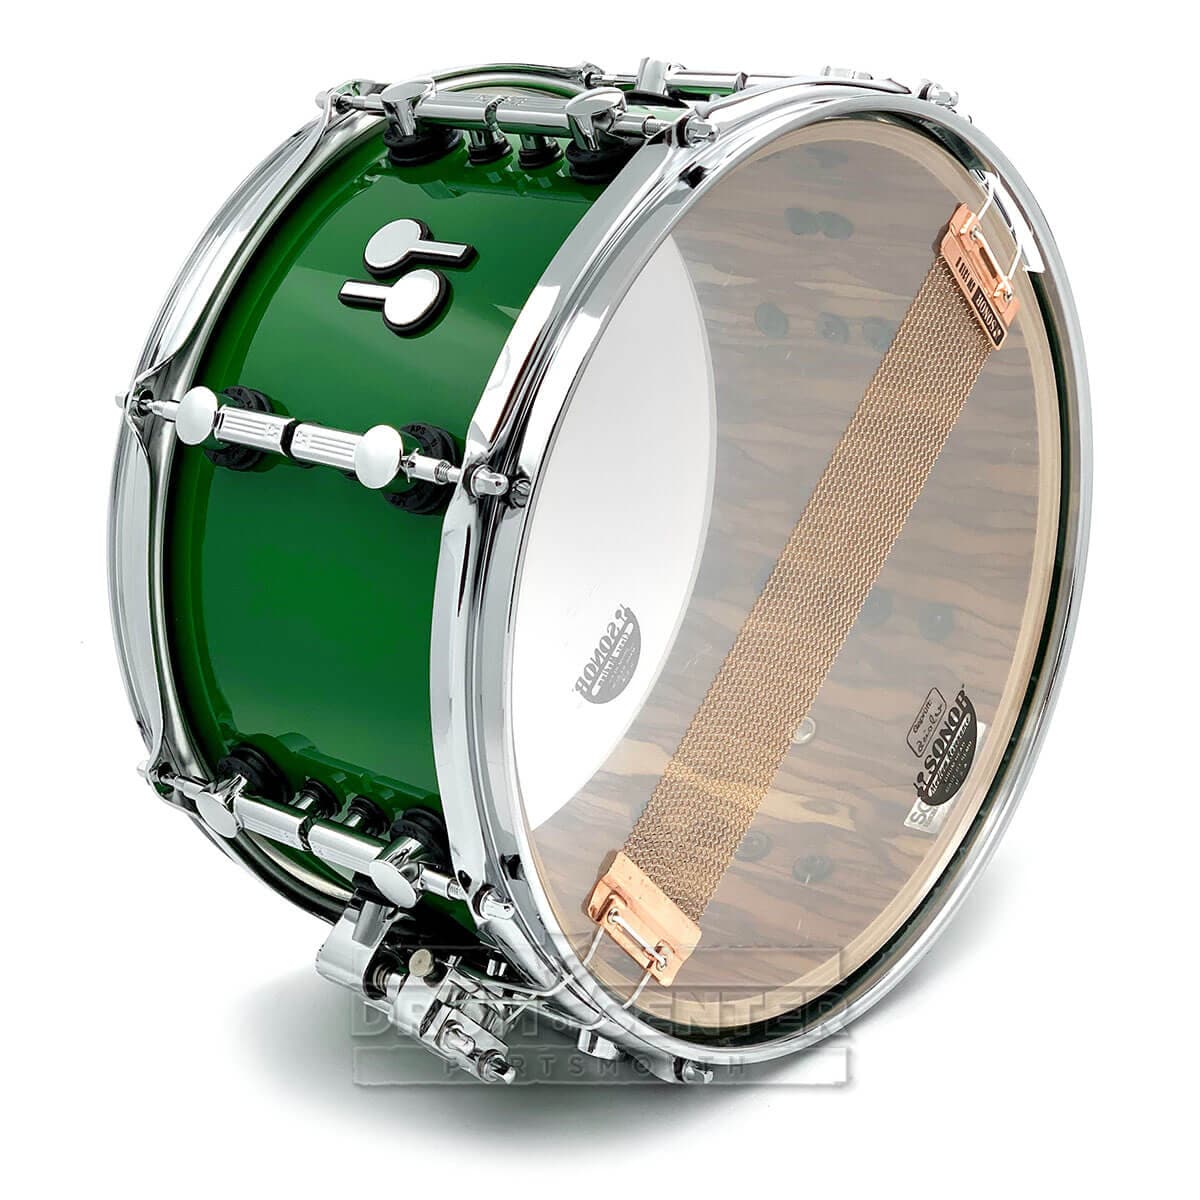 Sonor SQ2 Heavy Maple Snare Drum 13x7 Leaf Green – Drum Center Of